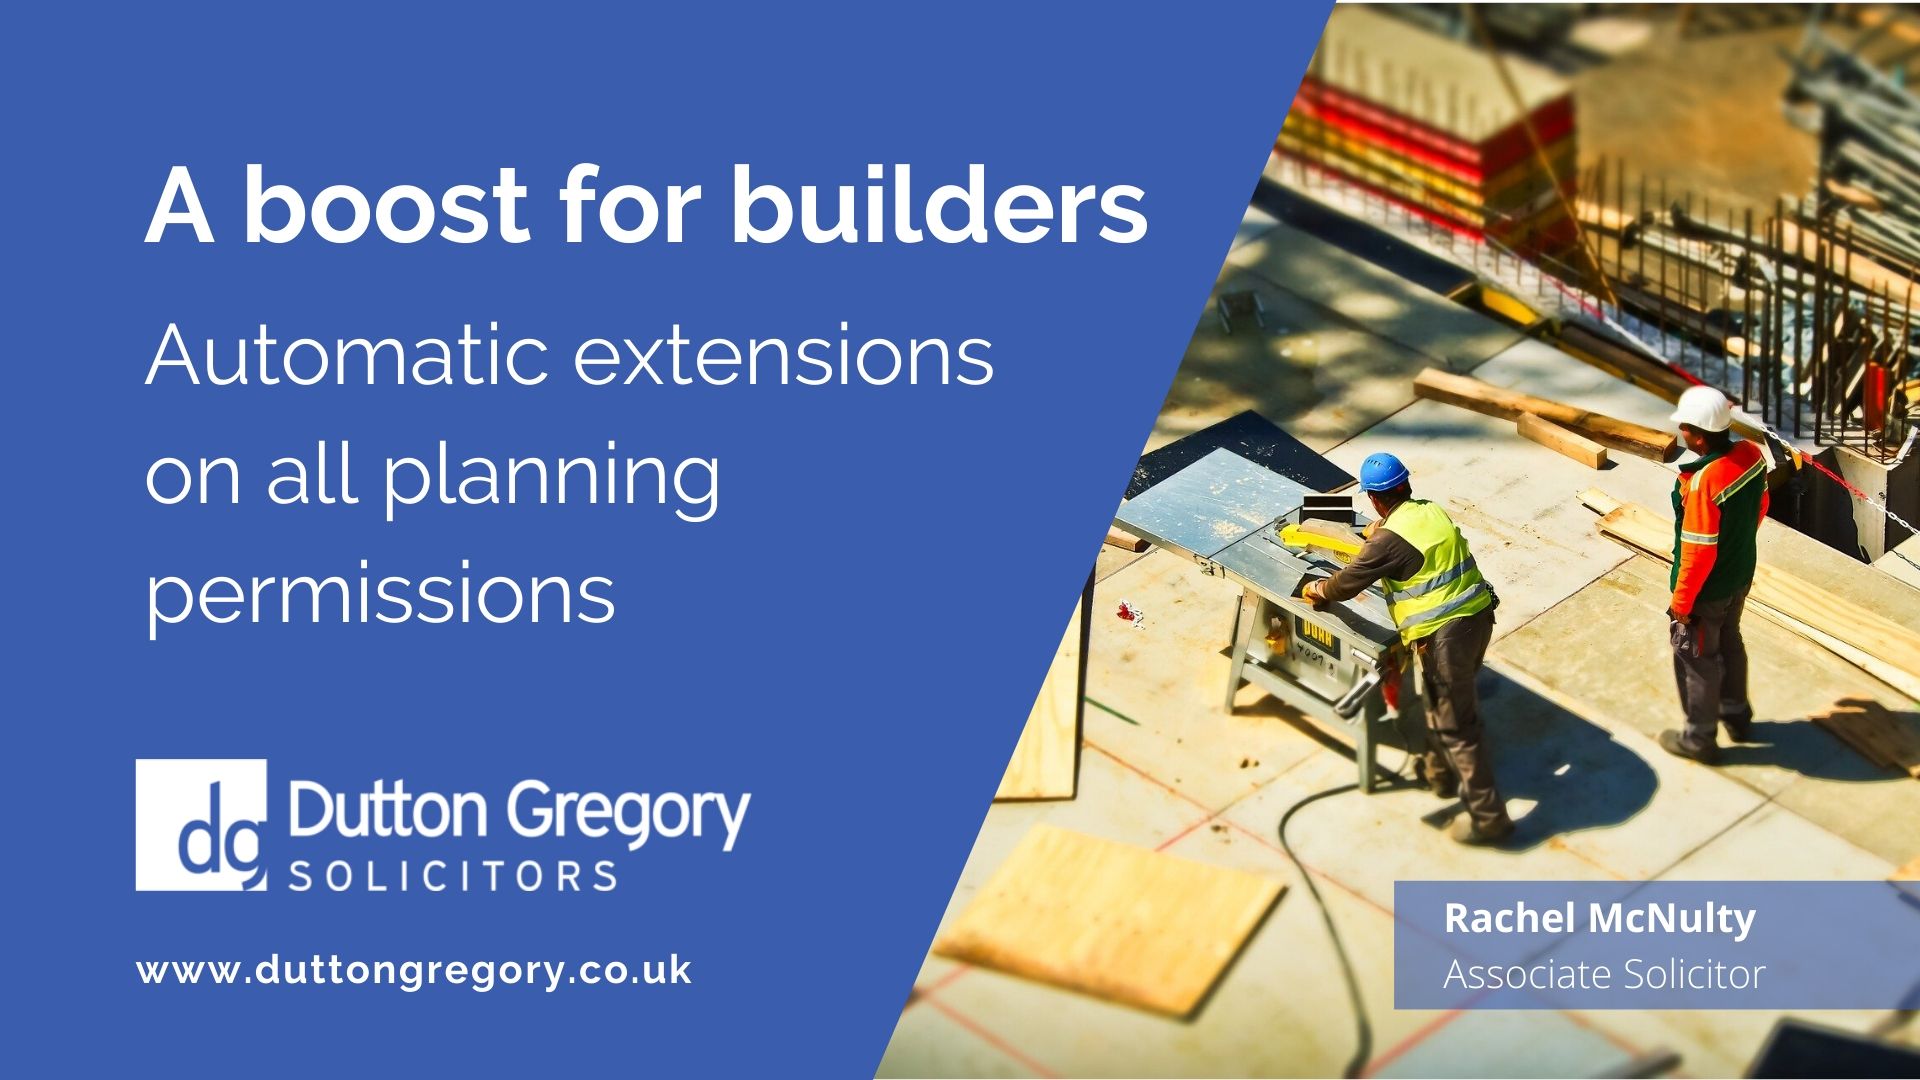 A boost for builders - automatic extensions on all planning permissions